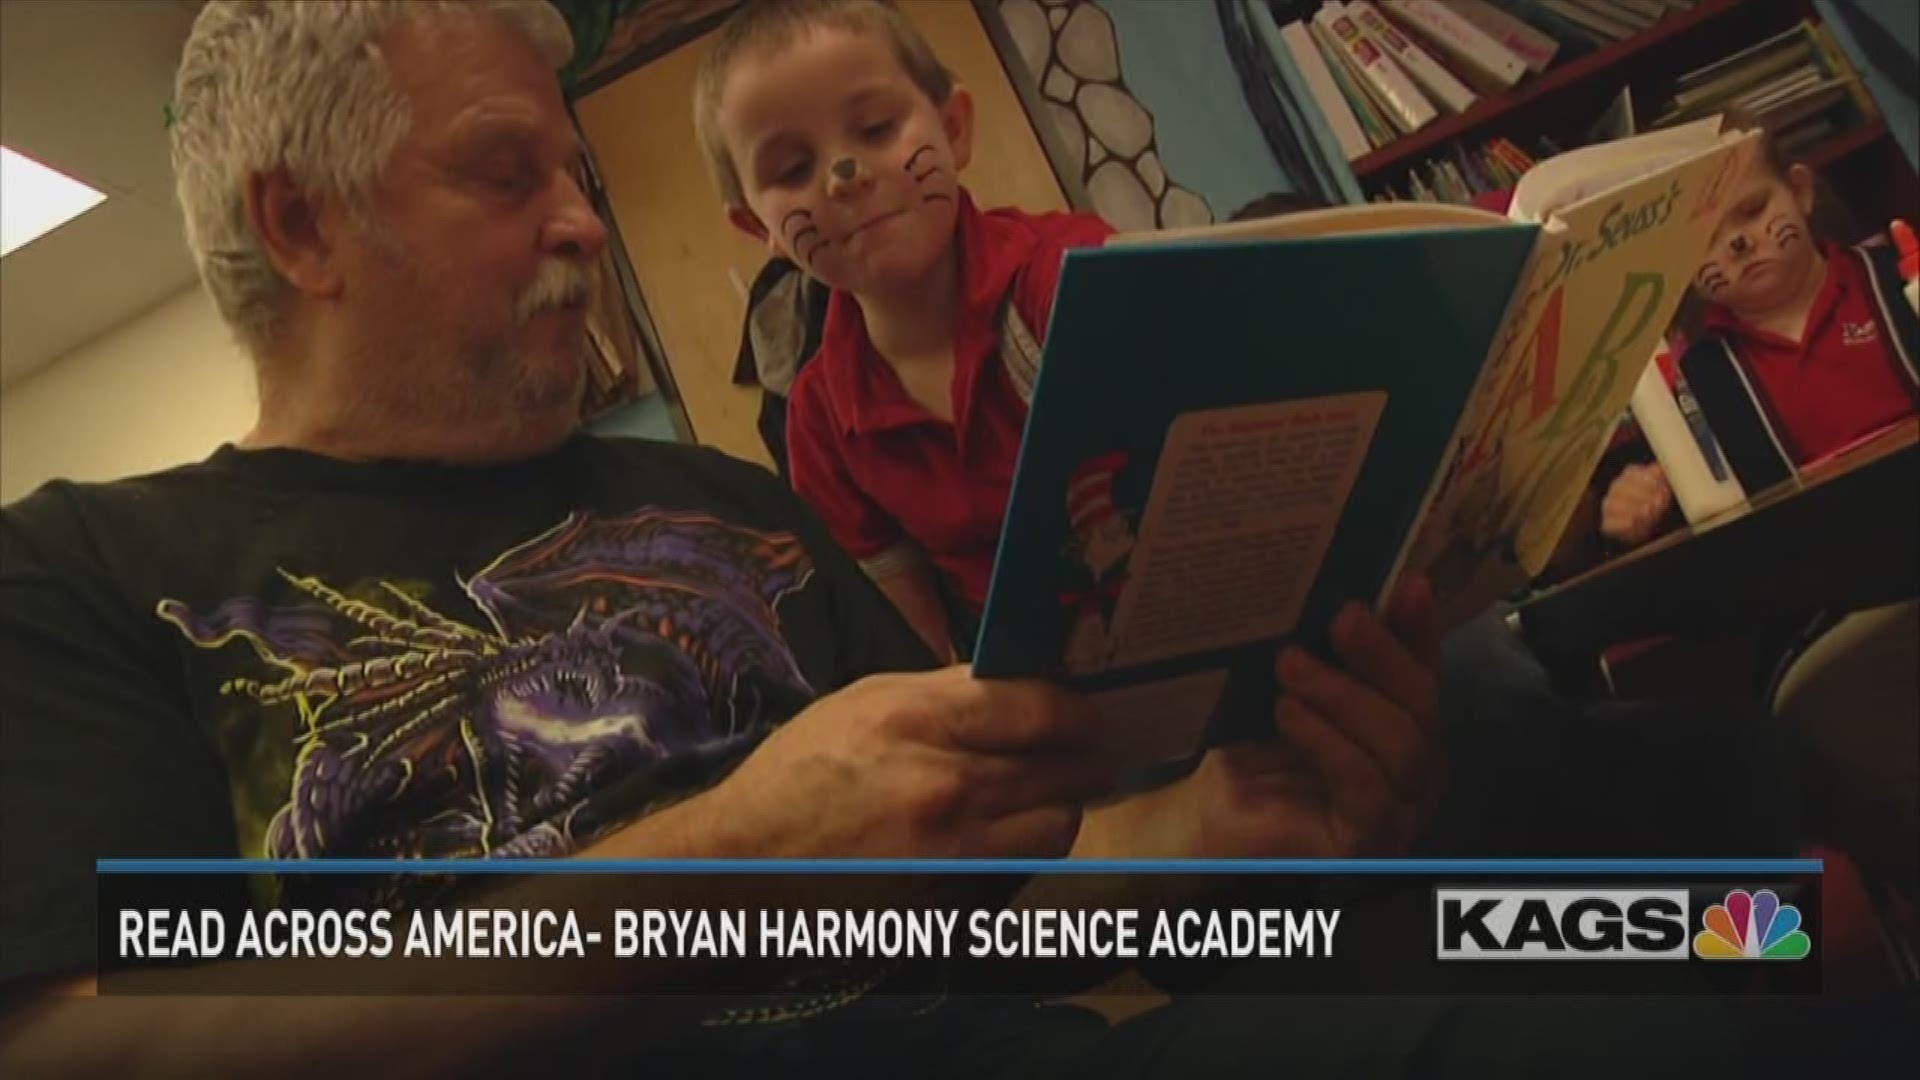 Bryan's Harmony Science academy invited parents to come read with their children.